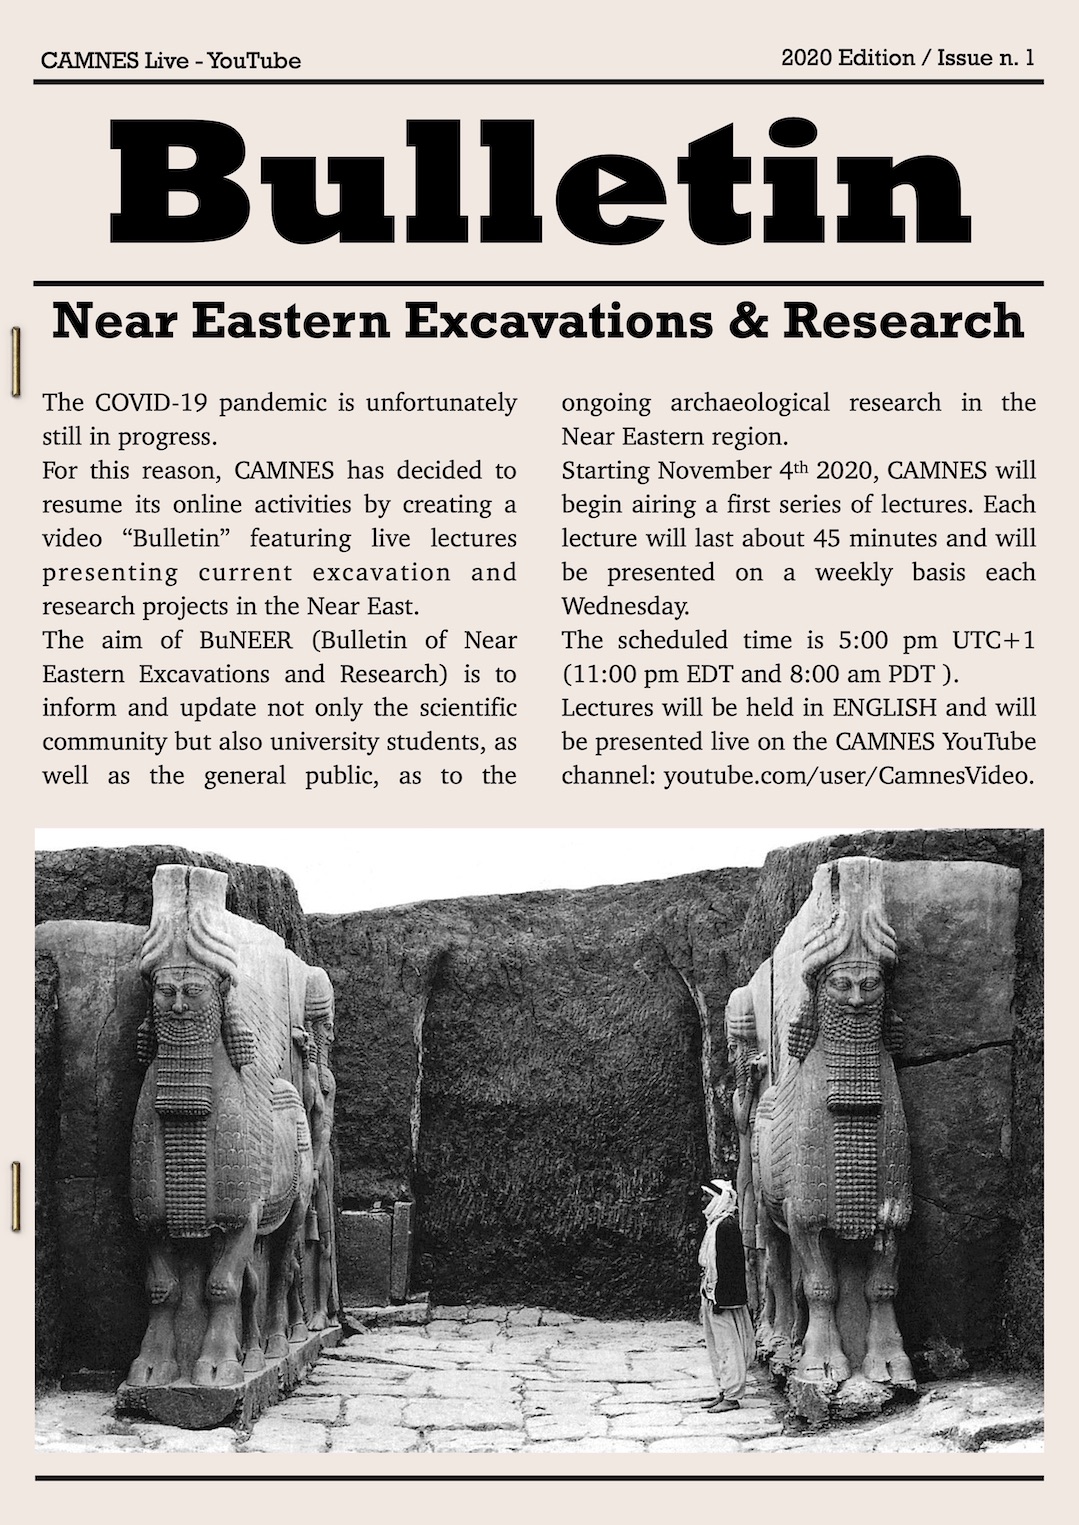 BuNEER: Bulletin of Near Eastern Excavations and Research